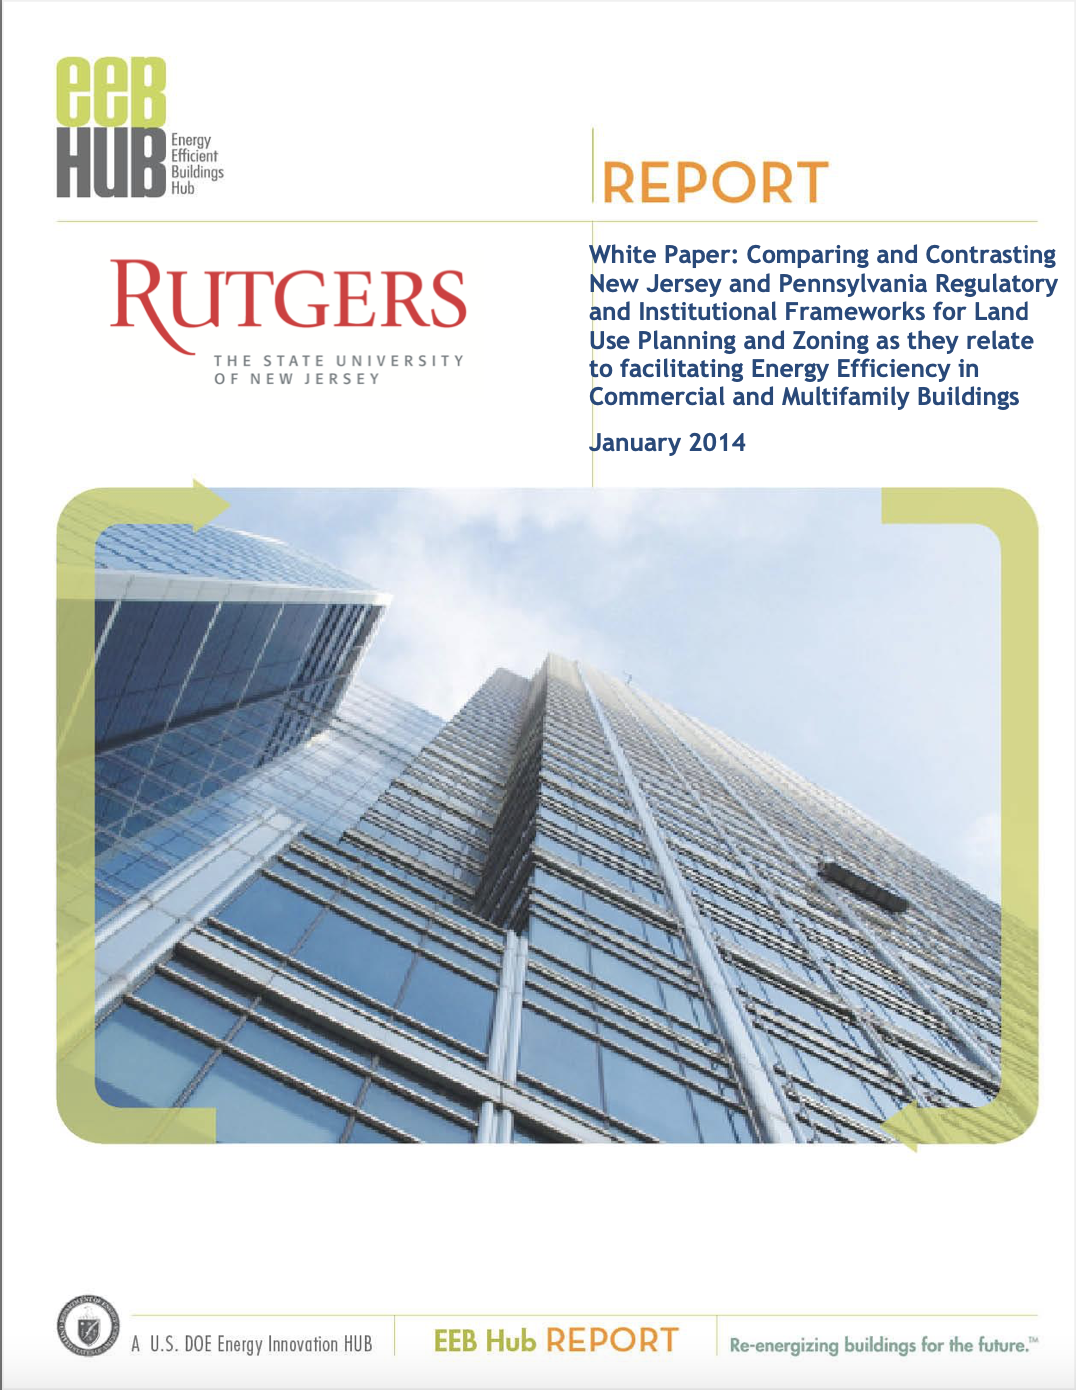 White Paper: Comparing and Contrasting New Jersey and Pennsylvania Regulatory and Institutional Frameworks for Land Use Planning and Zoning as they relate to facilitating Energy Efficiency in Commercial and Multifamily Buildings